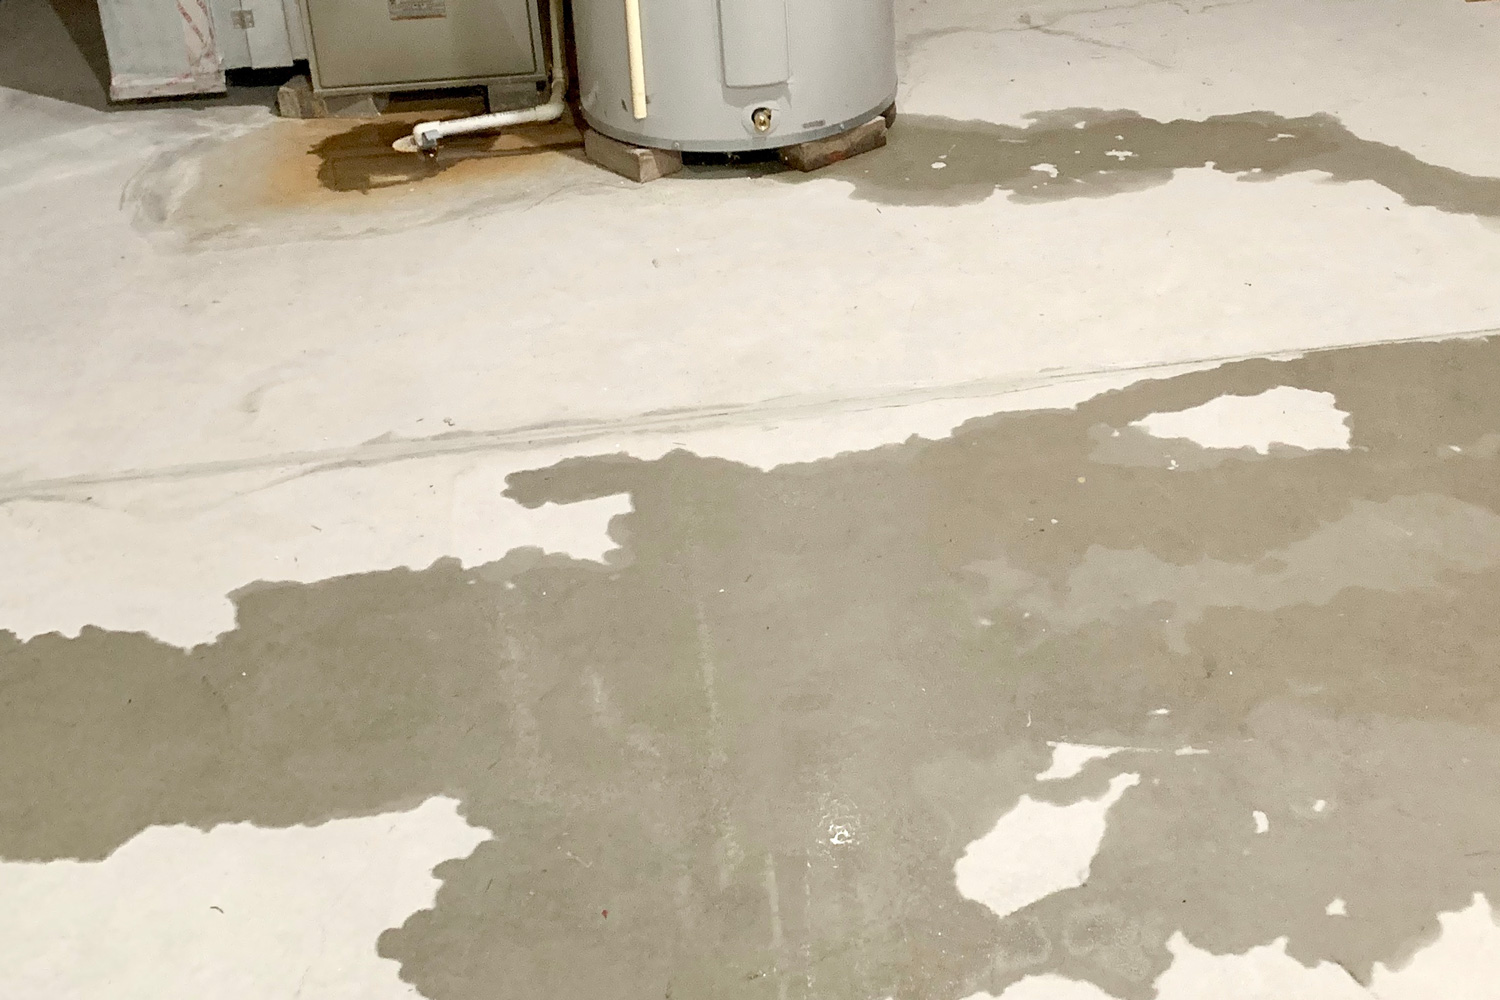 Water intrusion in basement with visible water on basement cement floor